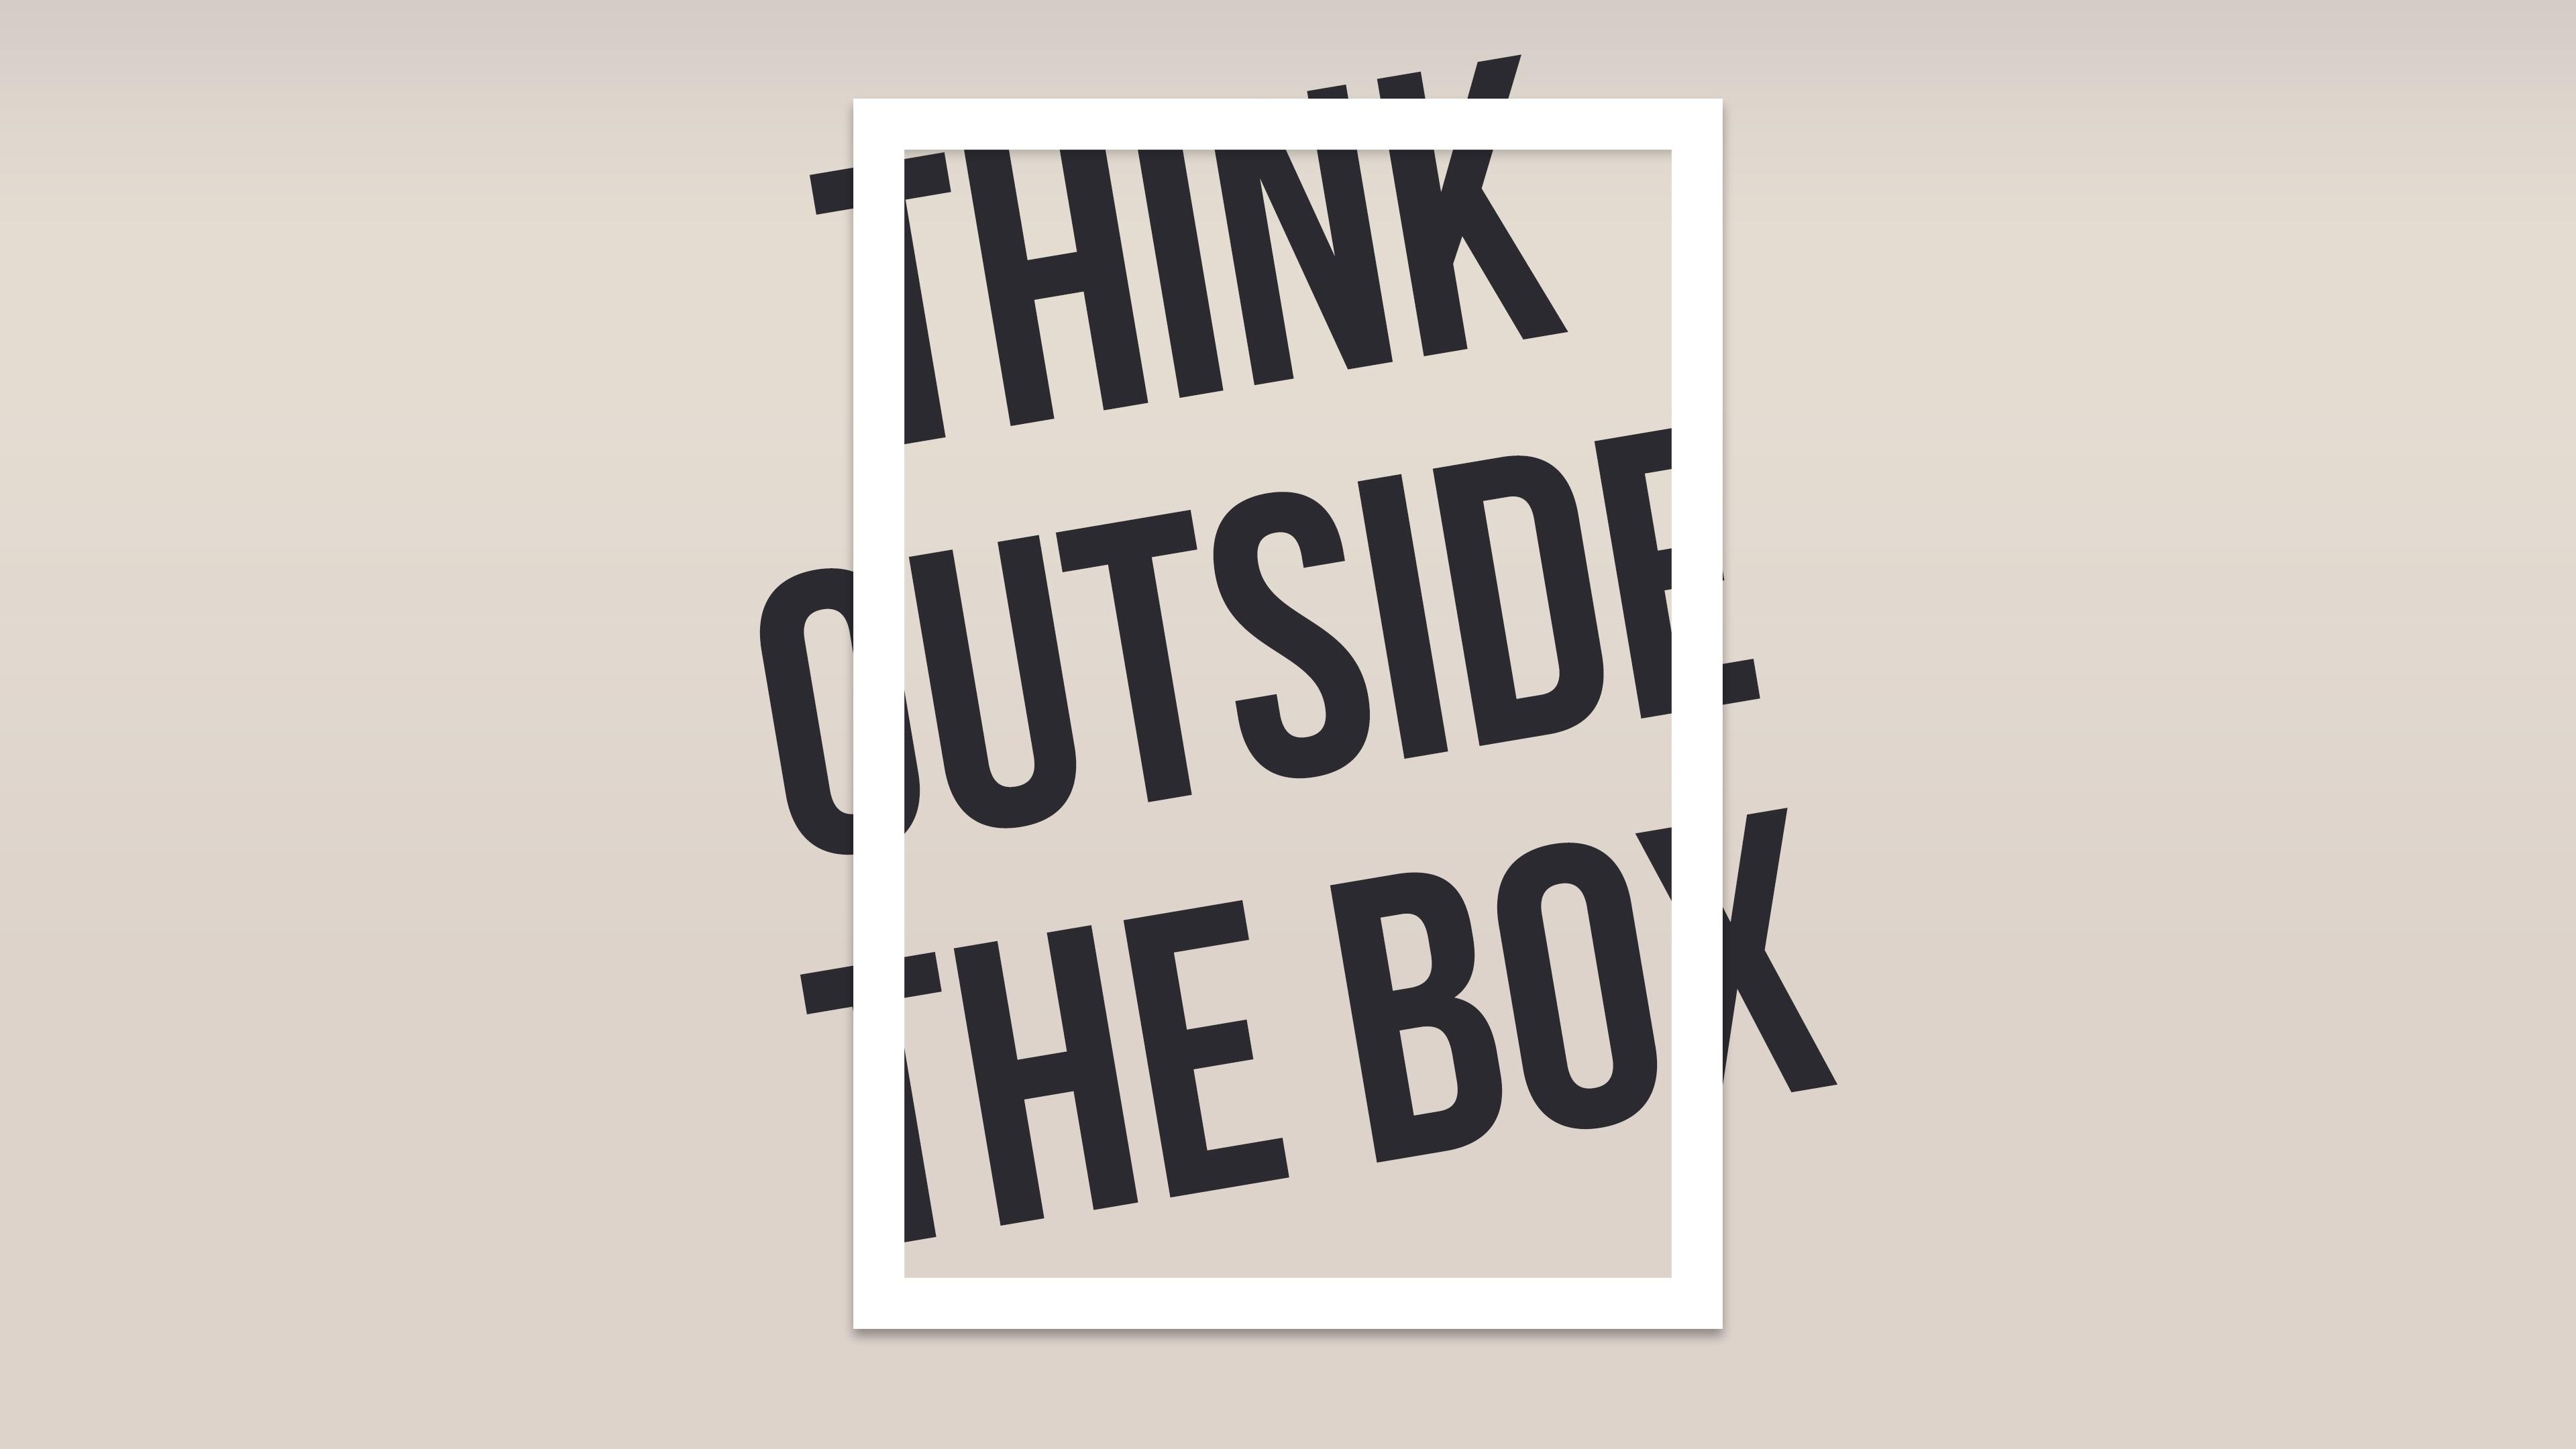 Think Outside The Box Wallpaper, HD Inspirational & Quotes